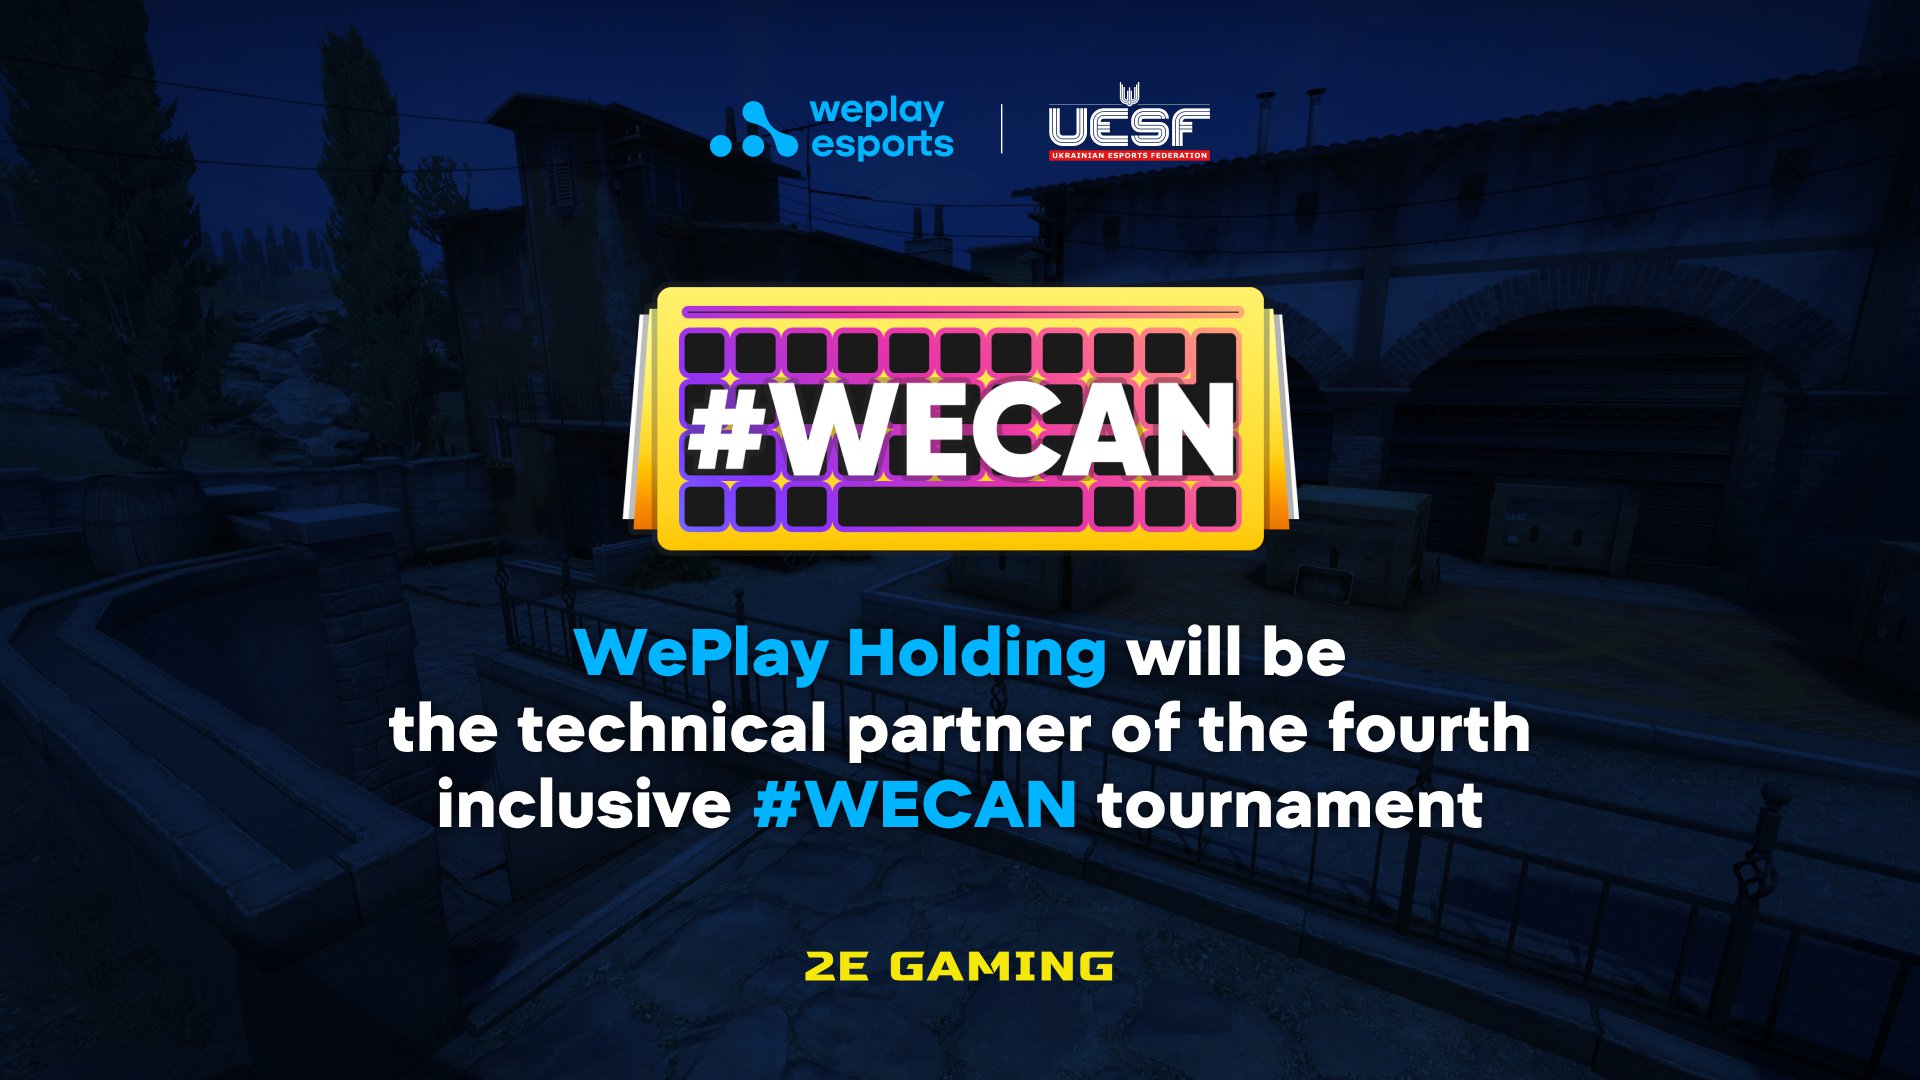 WePlay Holding will be the technical partner of the fourth inclusive #WECAN tournament. Image: WePlay Holding